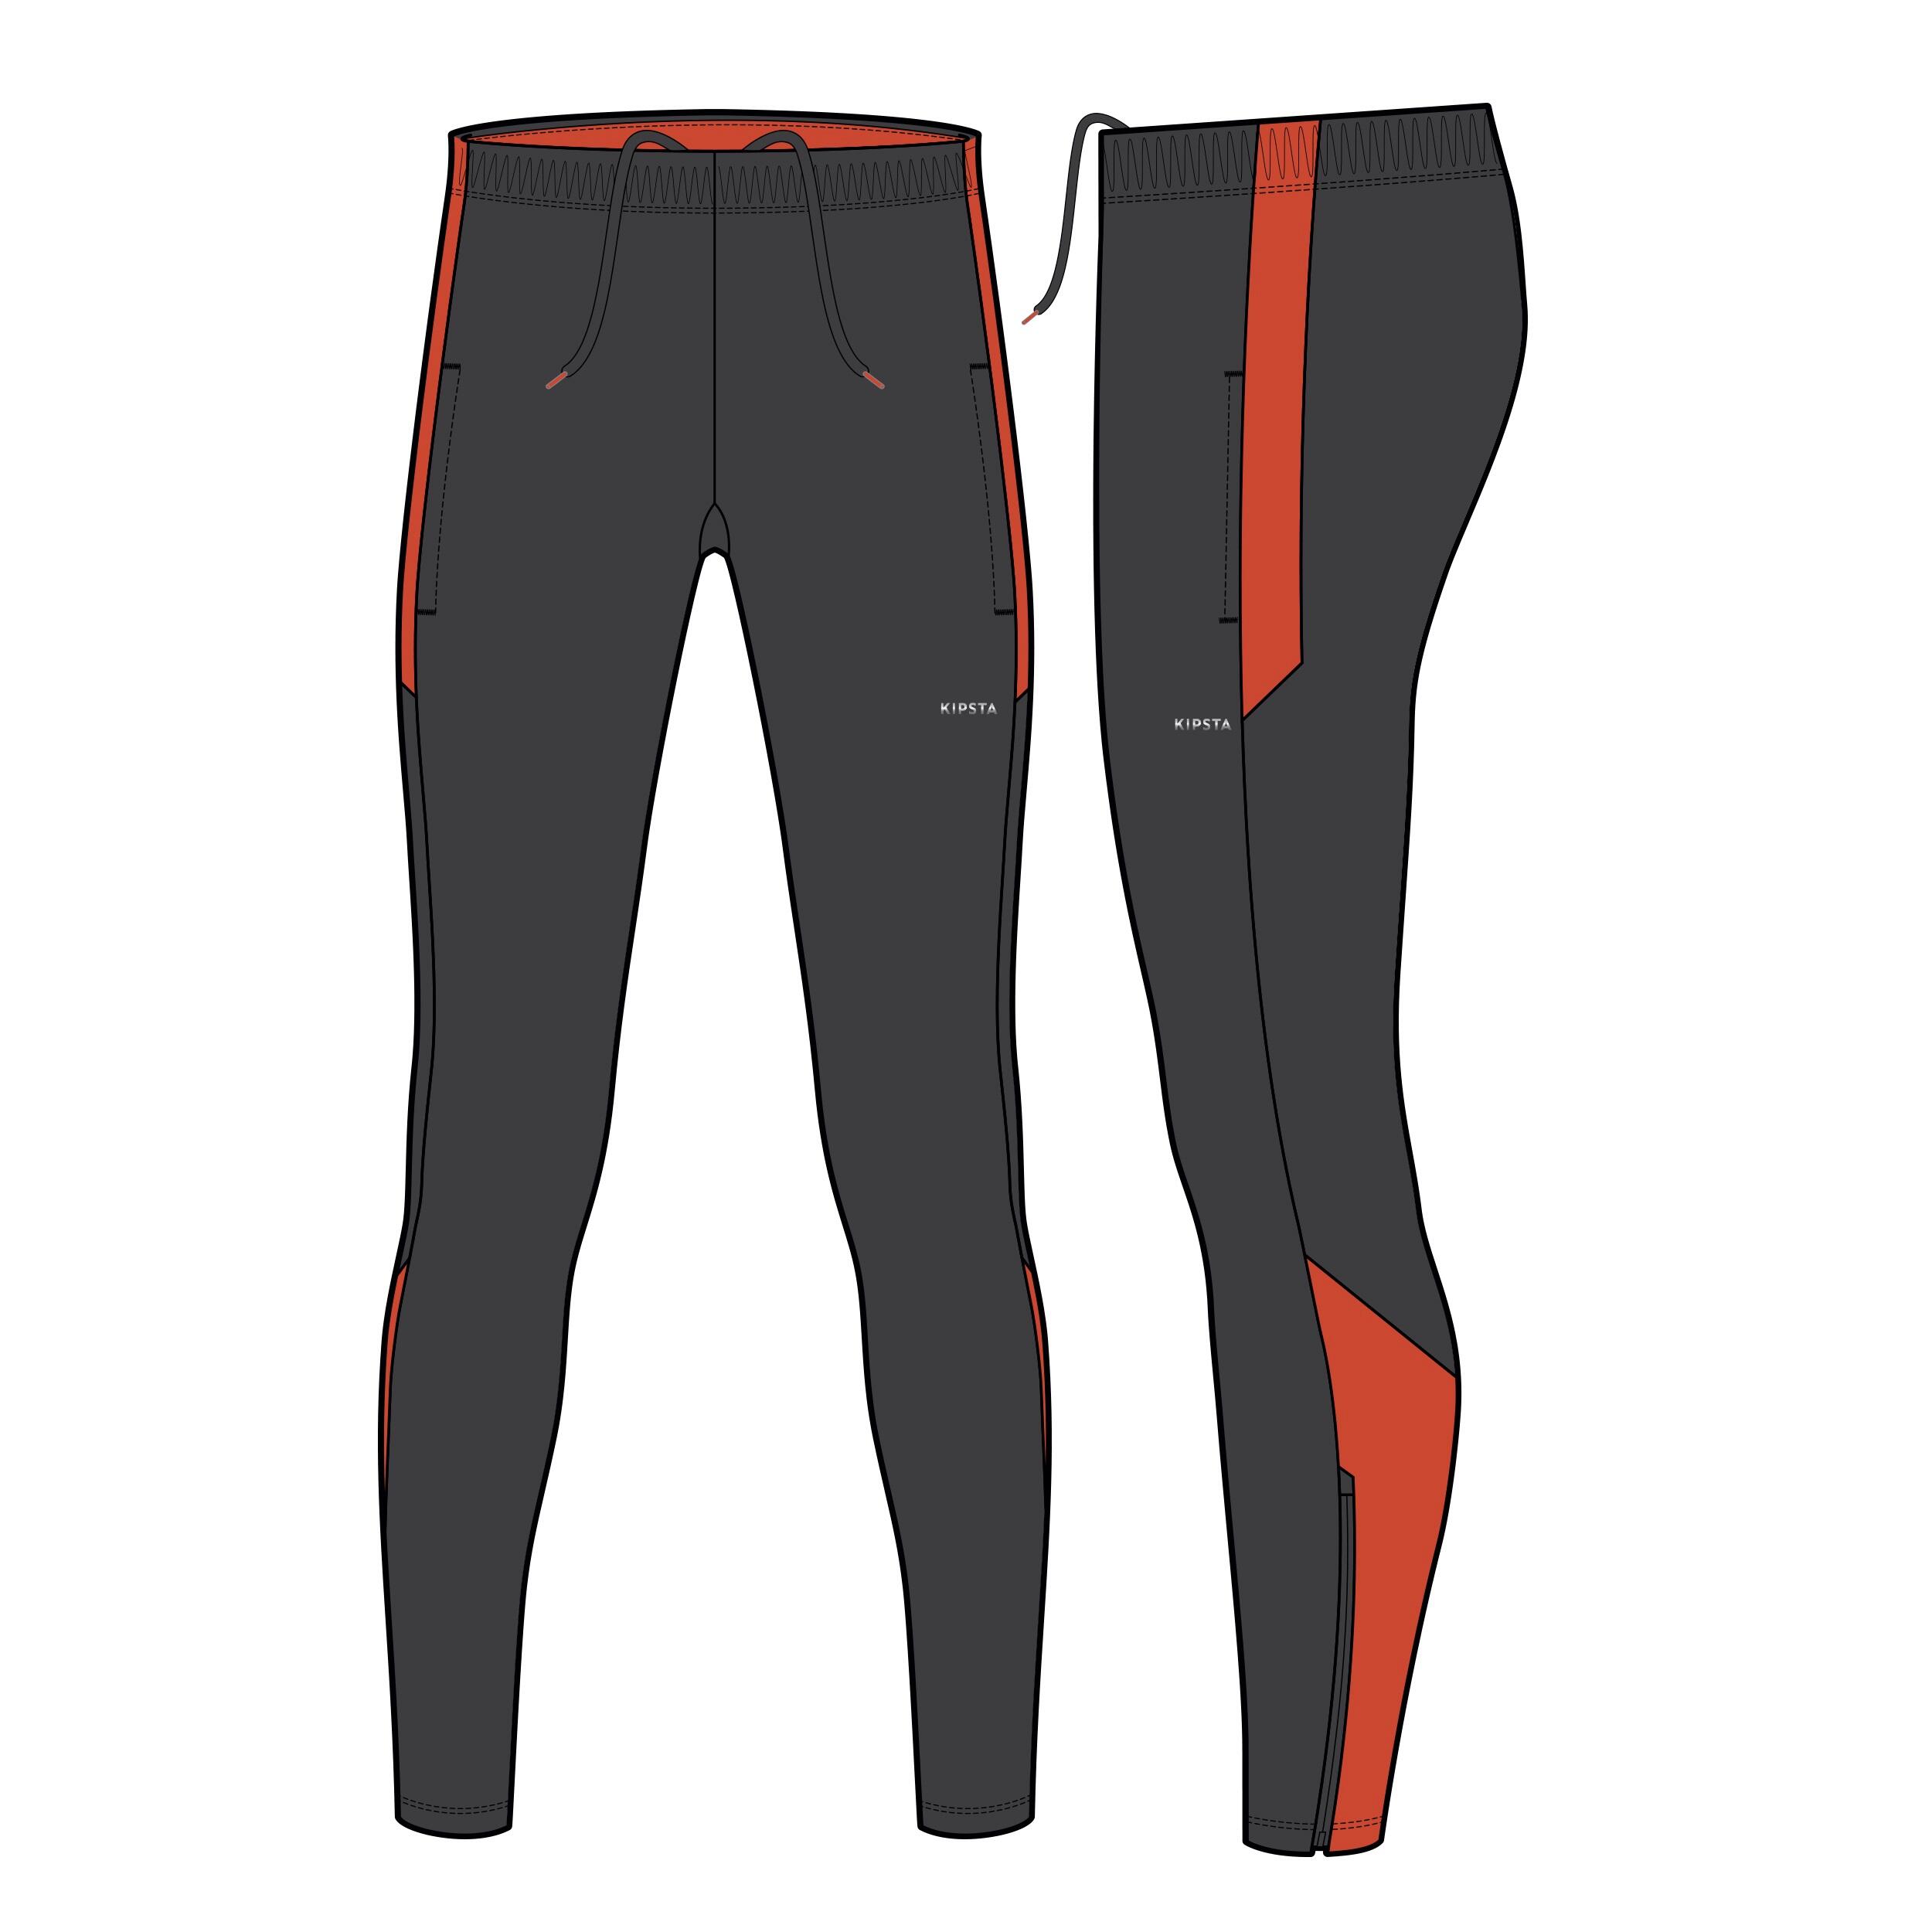 Football Bottoms Viralto Club - Anthracite Grey and Red 5/5